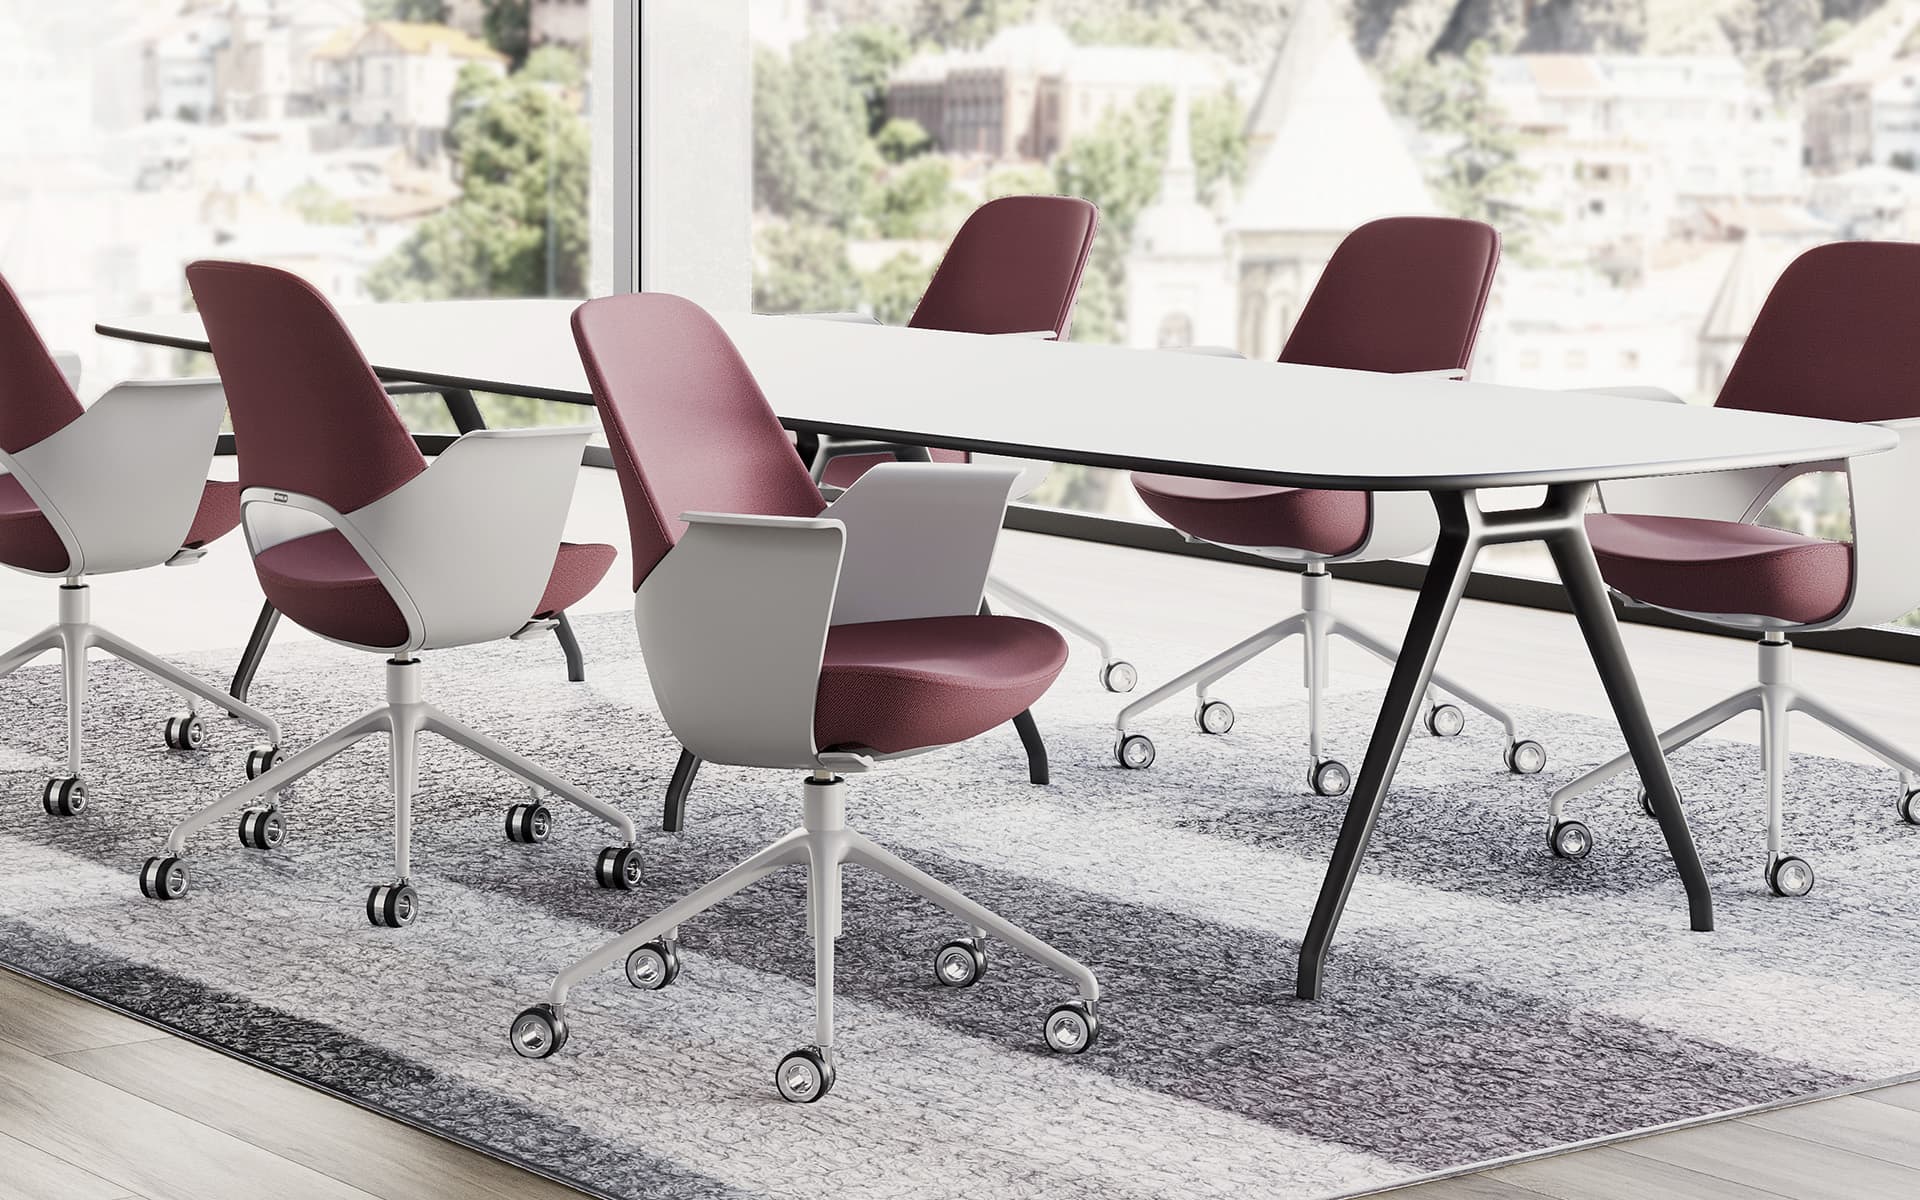 Six dark red Henglin Caia office chairs by ITO Design around a meeting table